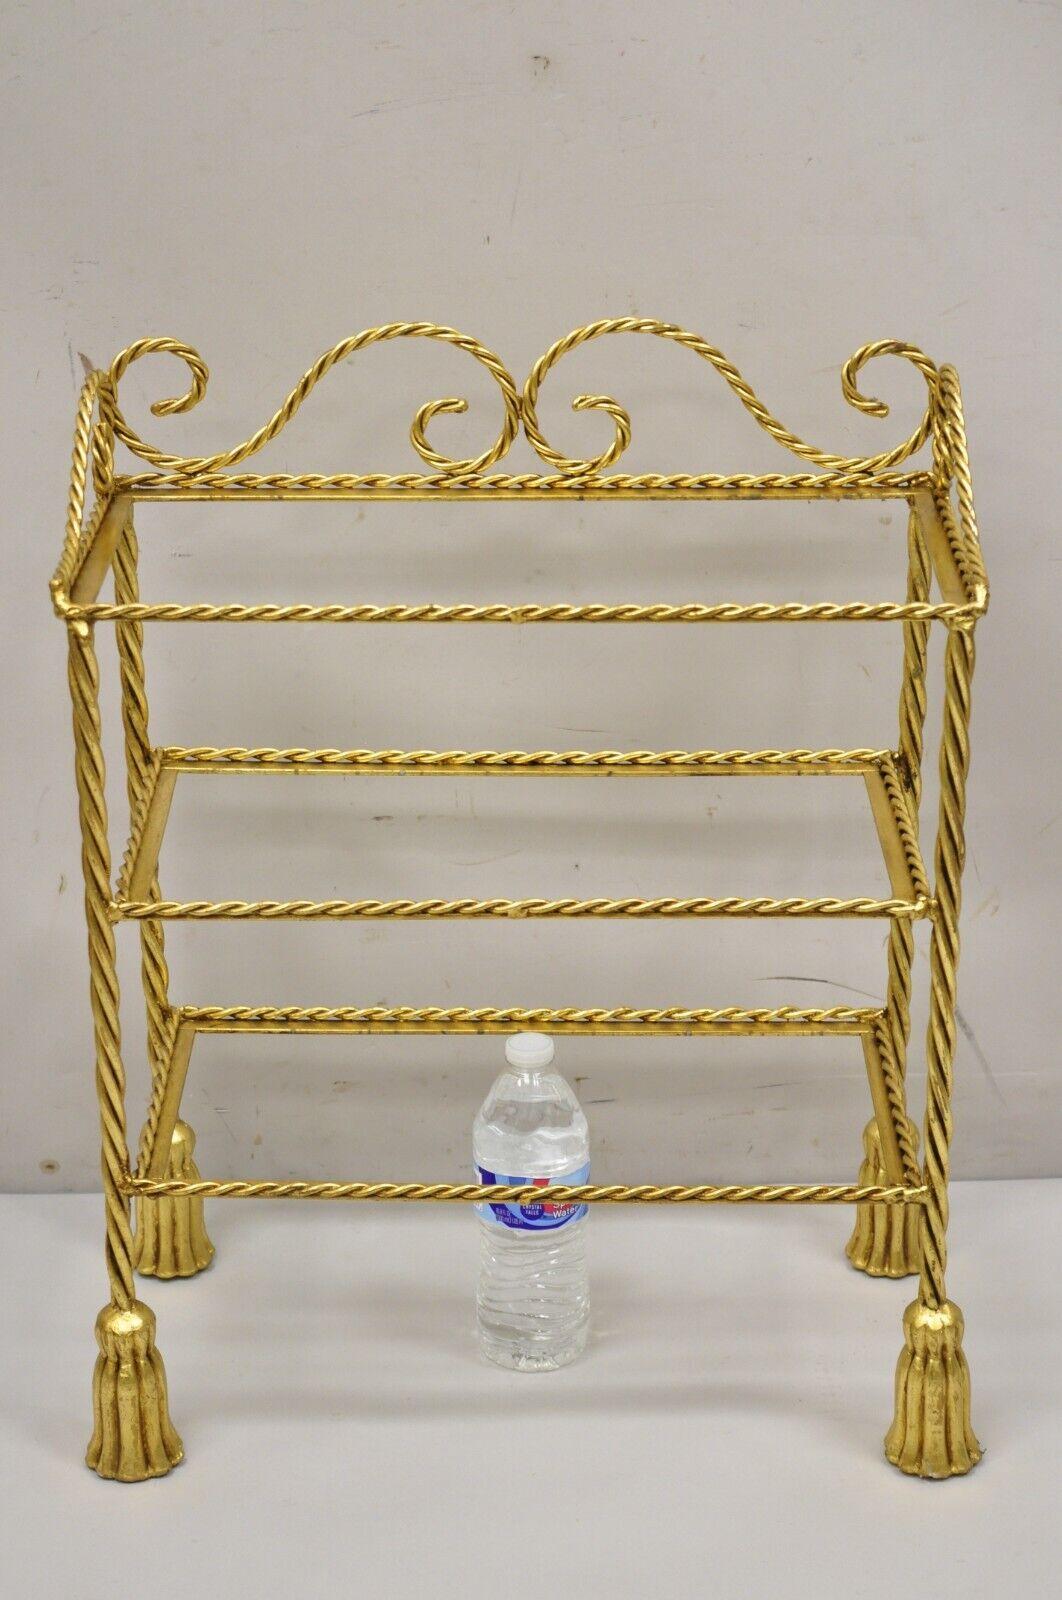 Vintage Italian Hollywood Regency Gold Gilt Iron 3 Tier Shelf Small Curio Display stand (B). Item featured is a nice small Size, 3 tiers, (no glass for shelves), rope design frame, tassel form feet, wrought iron construction, quality Italian